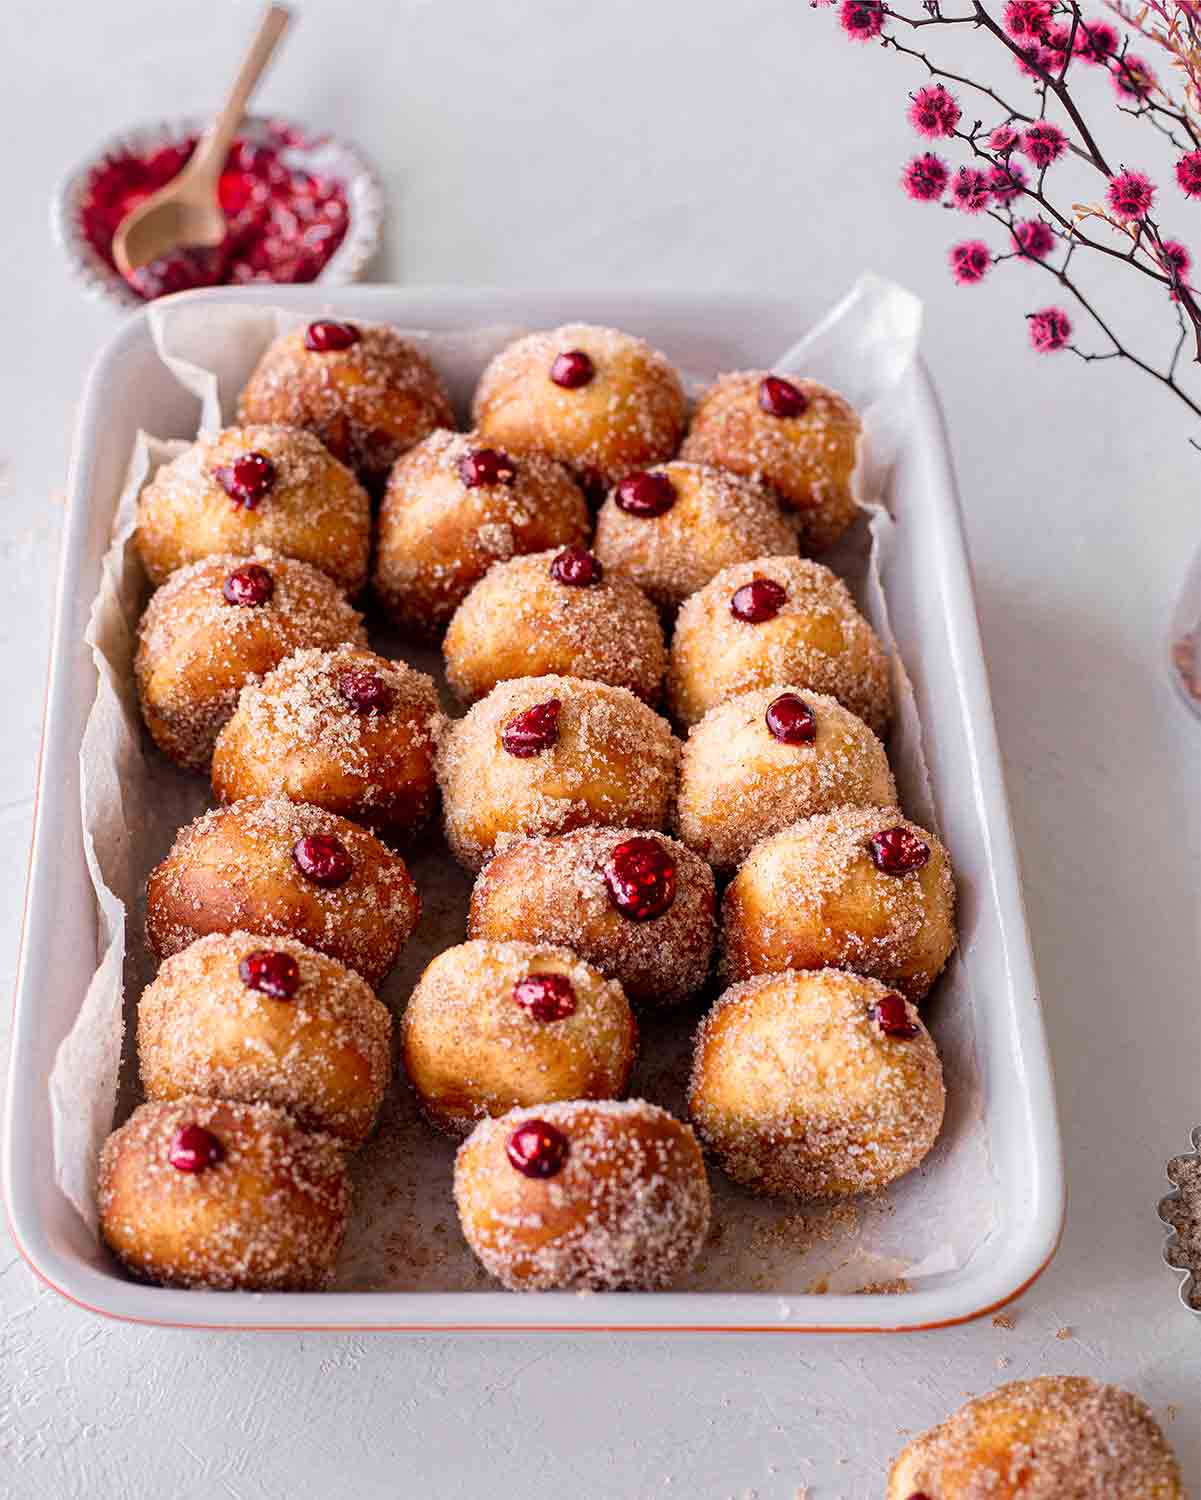 Lots of mini sugared donuts in a lined baking tray.